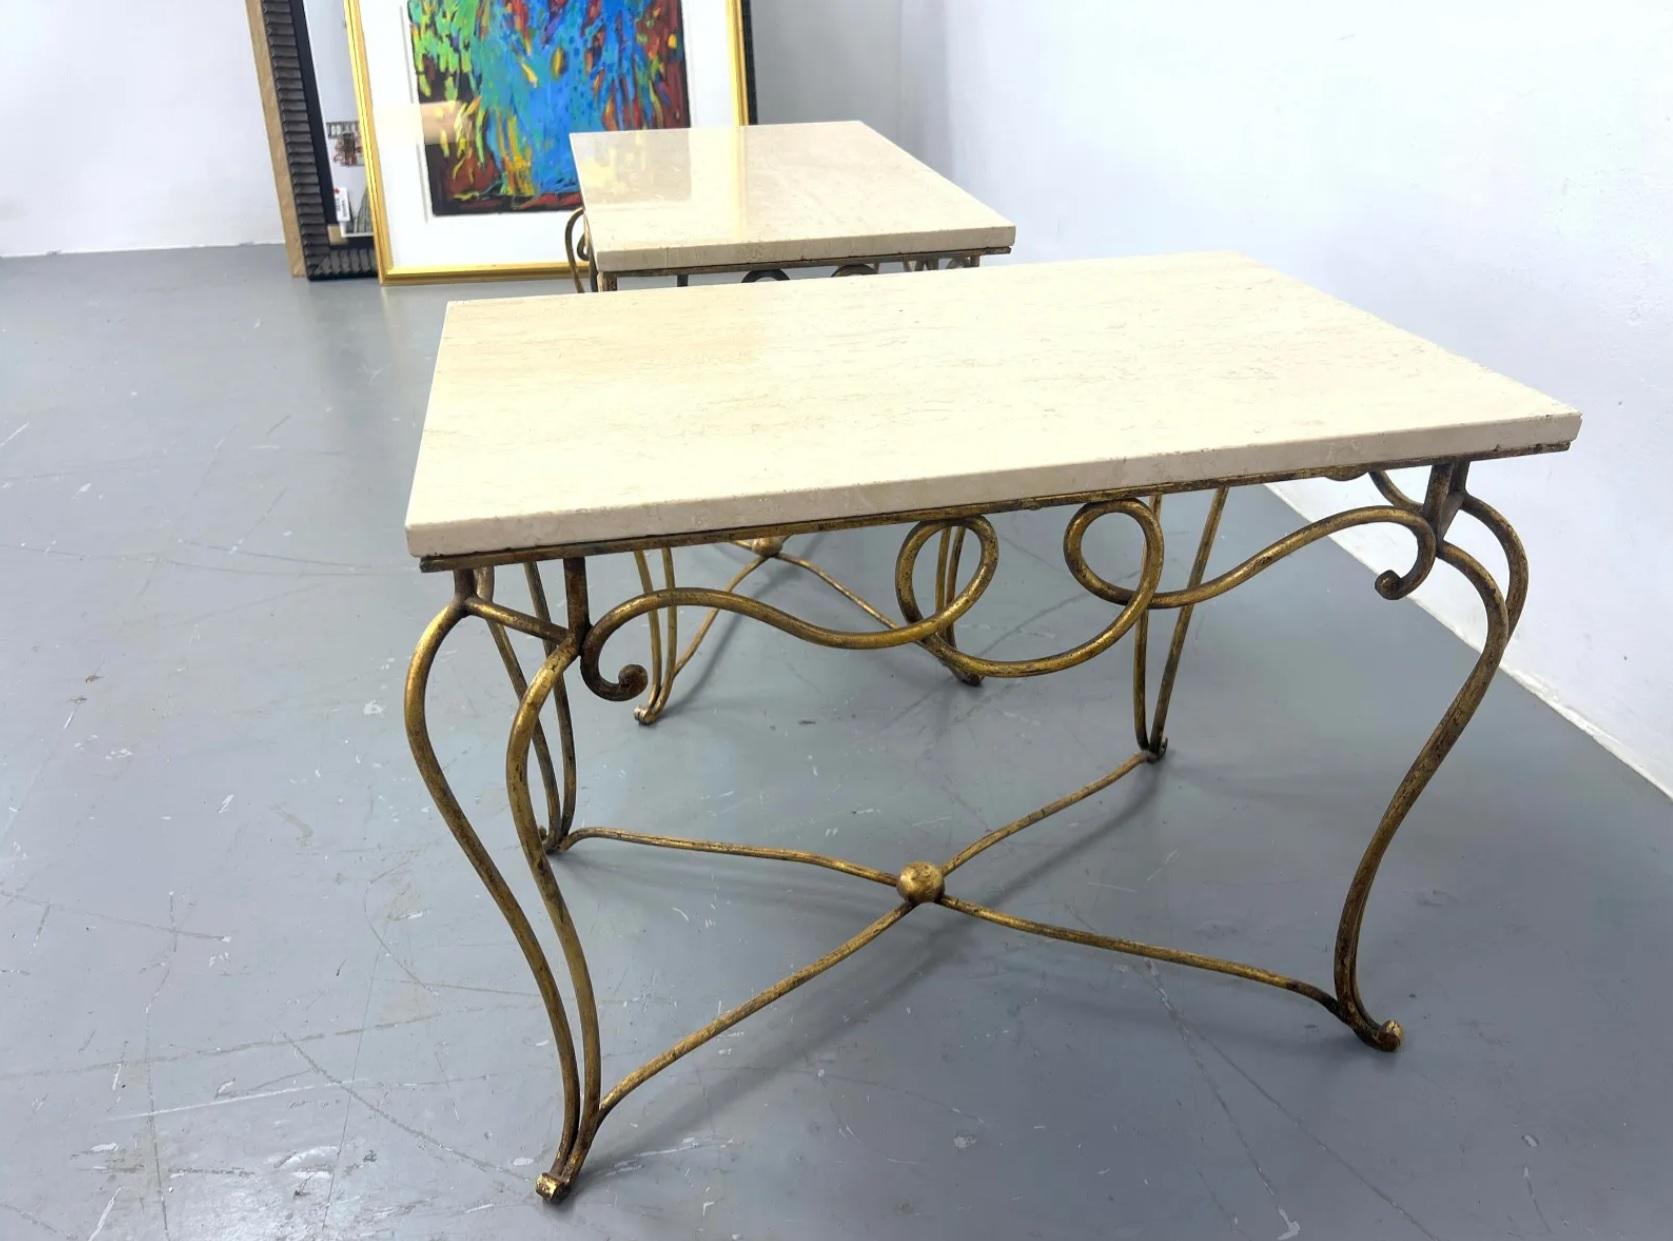 Midcentury French Rene Prou Art Deco Gilded Iron End Tables with Travertine Tops In Good Condition For Sale In Chicago, IL